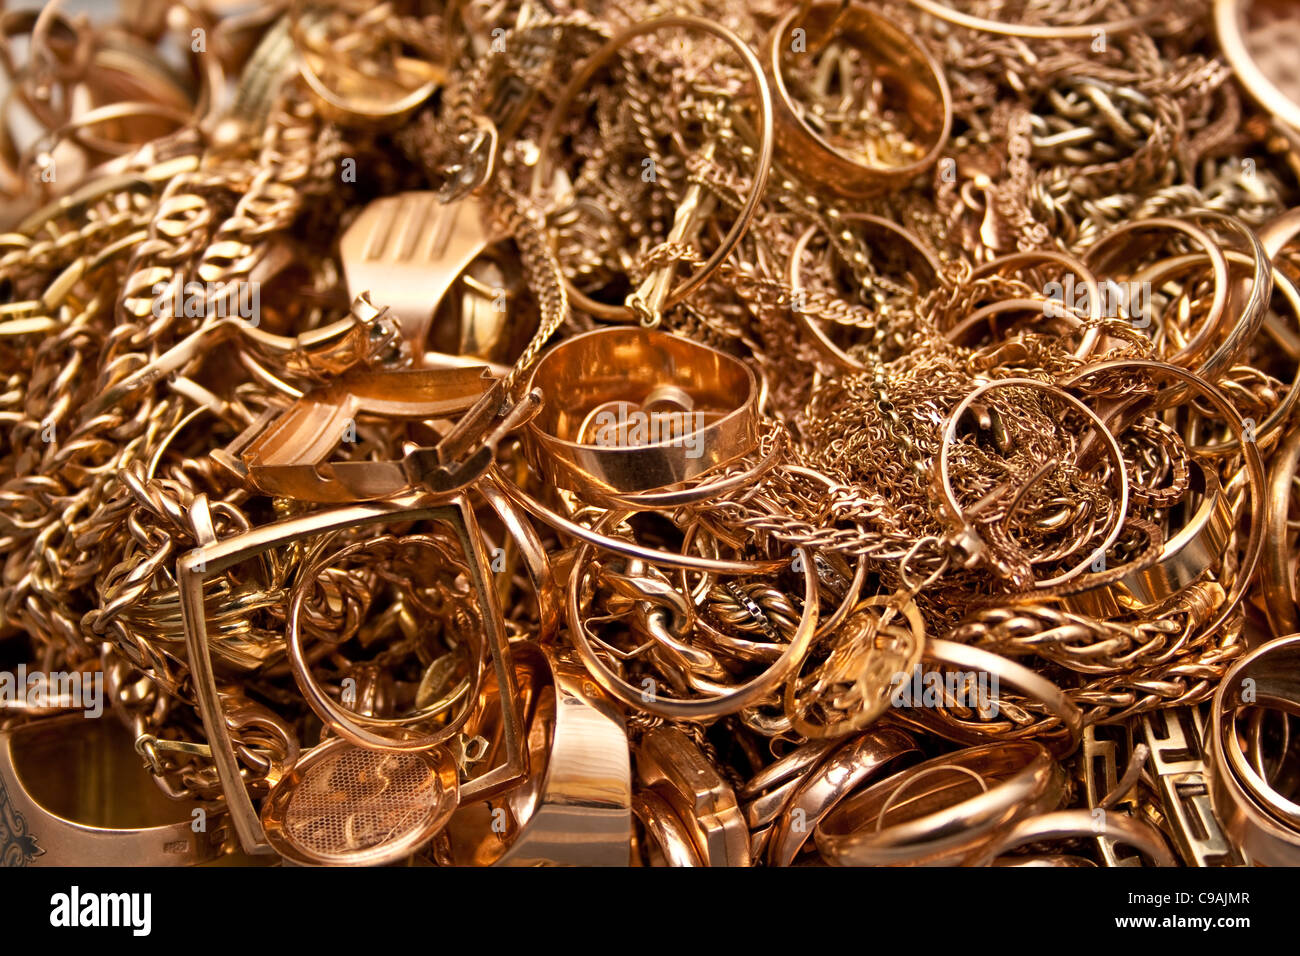 Pile of old gold jewelry Stock Photo - Alamy